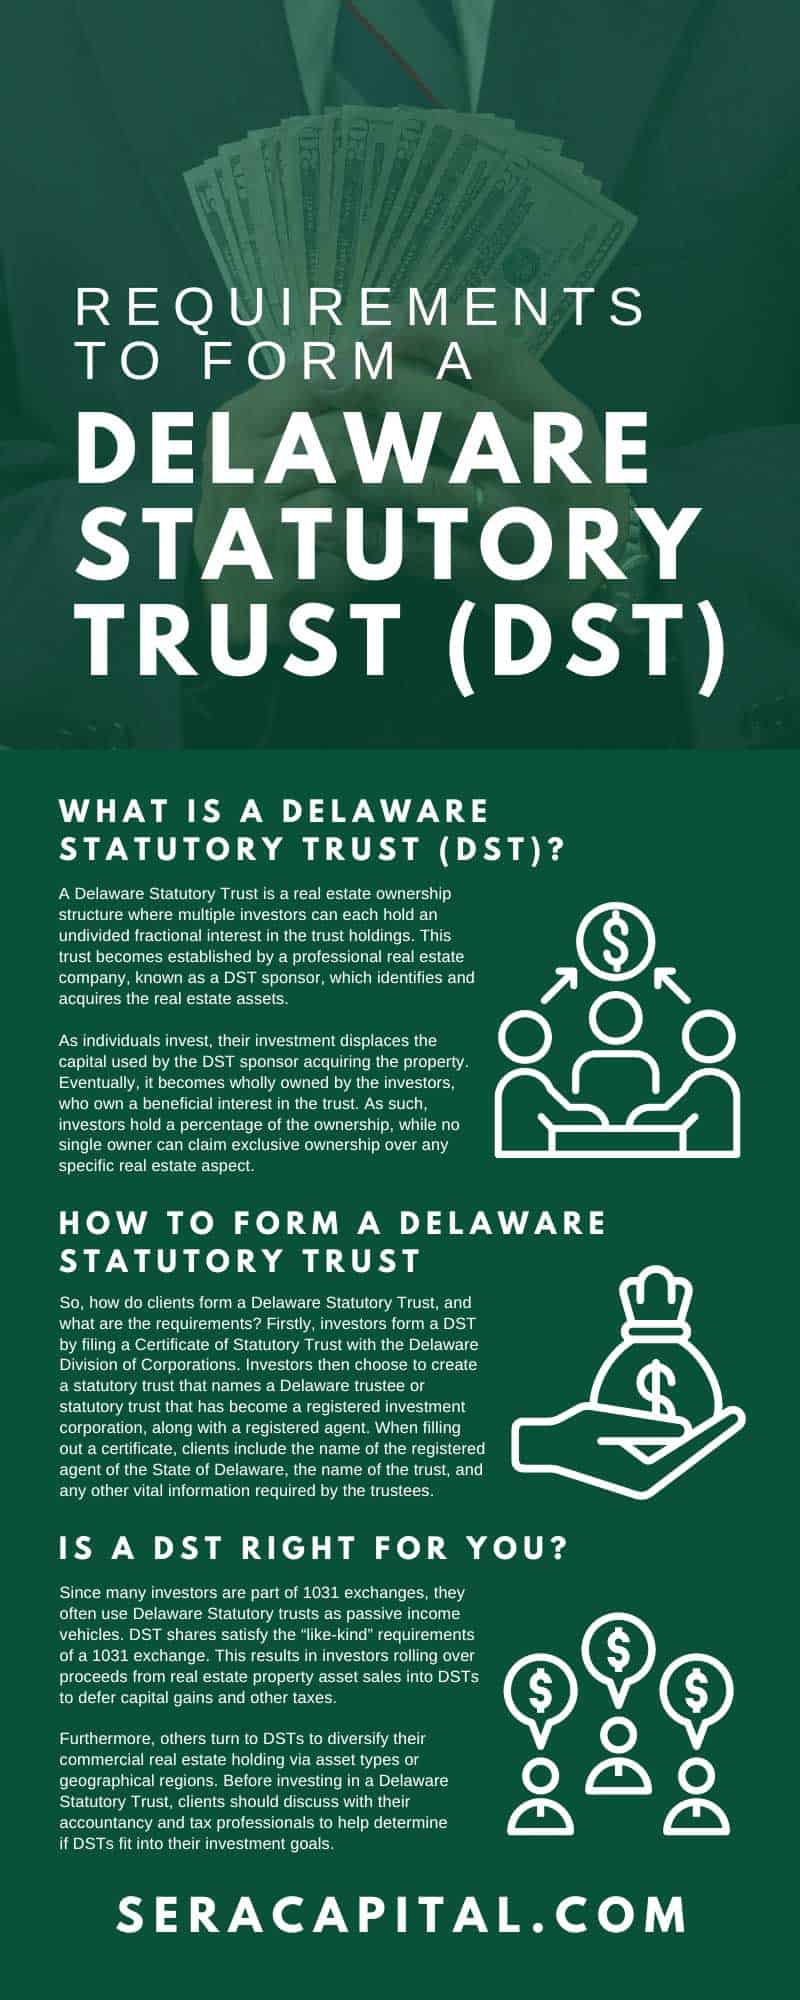 Requirements To Form a Delaware Statutory Trust (DST)